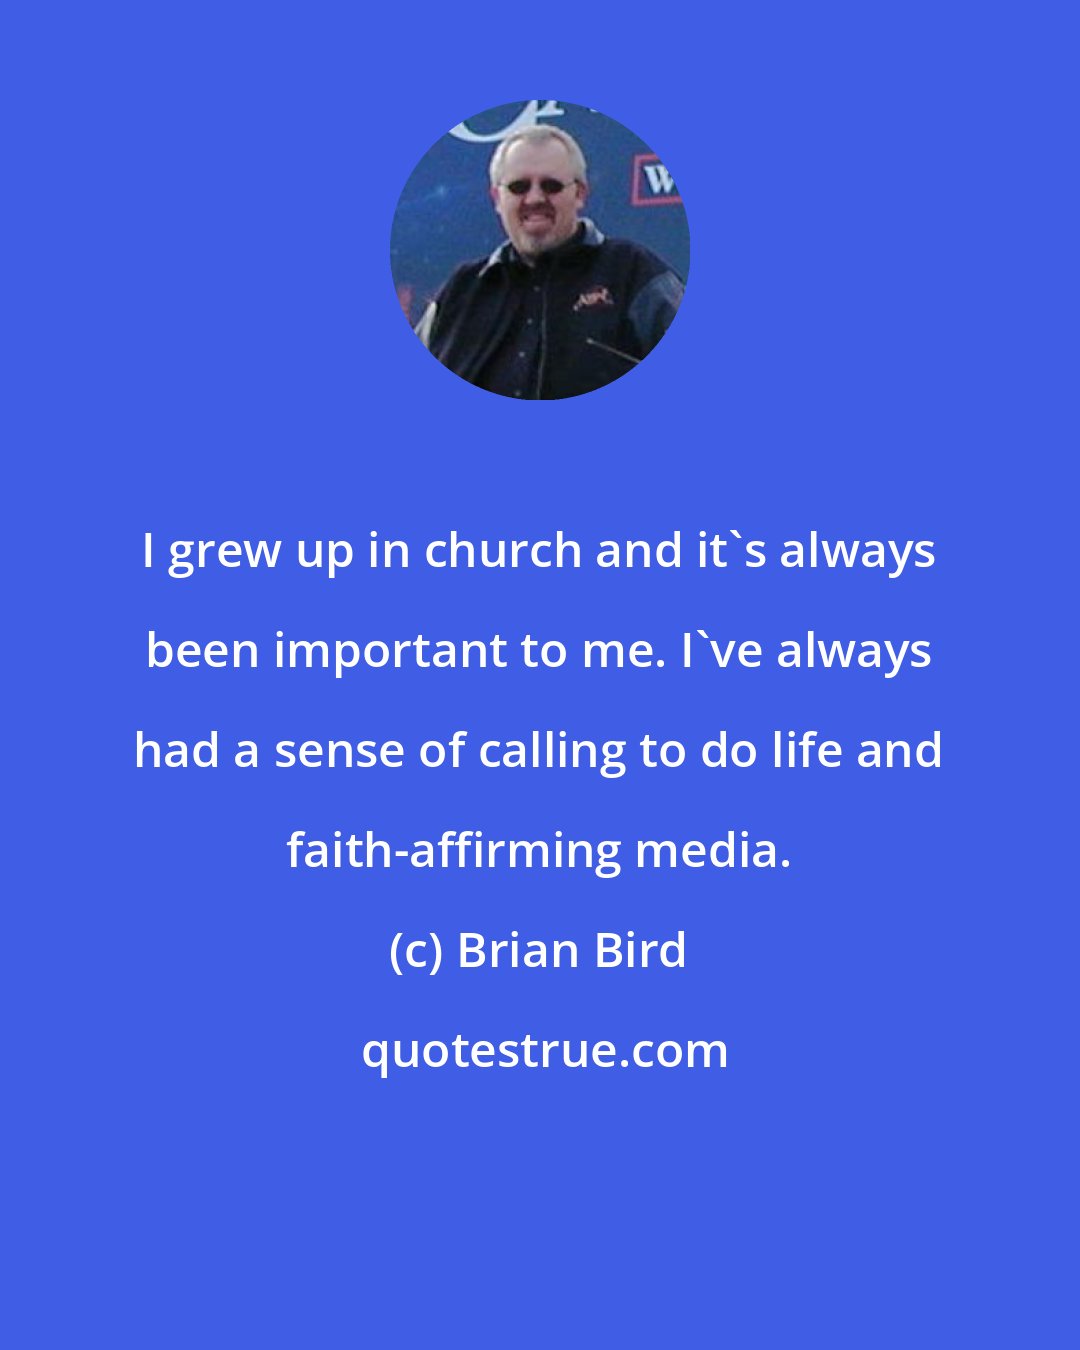 Brian Bird: I grew up in church and it's always been important to me. I've always had a sense of calling to do life and faith-affirming media.